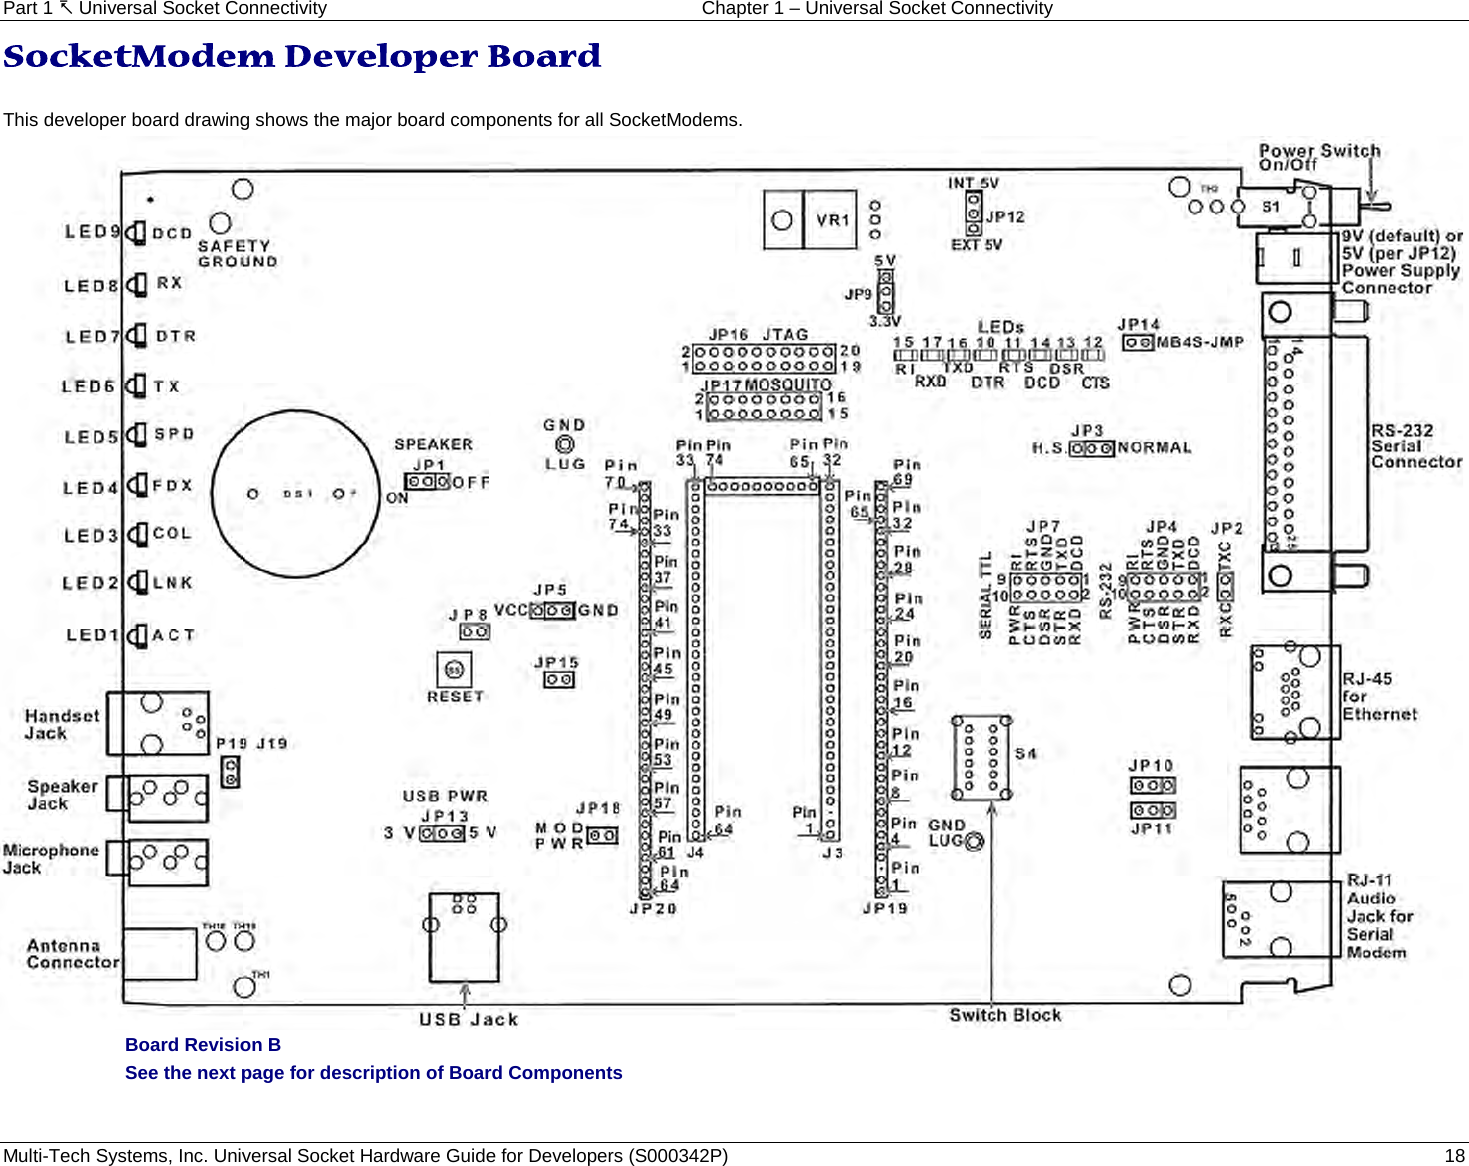 Part 1  Universal Socket Connectivity Chapter 1 – Universal Socket Connectivity Multi-Tech Systems, Inc. Universal Socket Hardware Guide for Developers (S000342P)  18 SocketModem Developer Board   This developer board drawing shows the major board components for all SocketModems.   Board Revision B See the next page for description of Board Components 